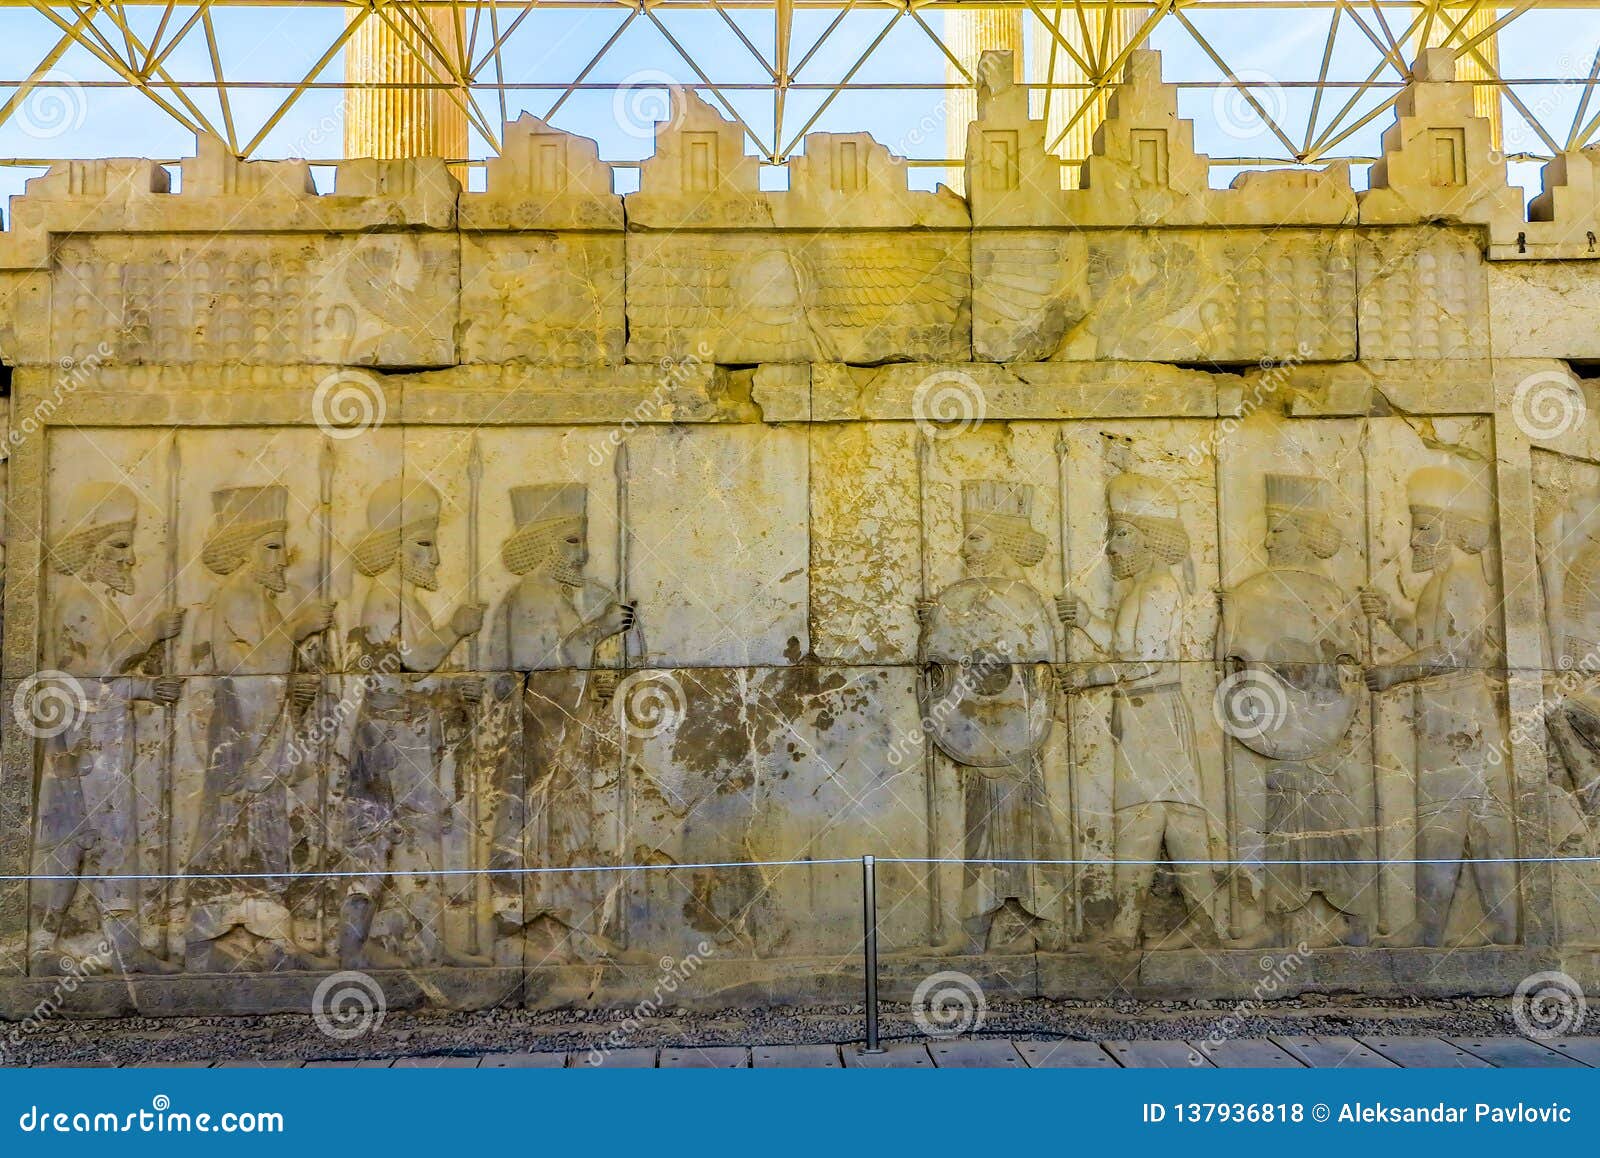 Persepolis Historical Site 12 Stock Photo - Image of great ...